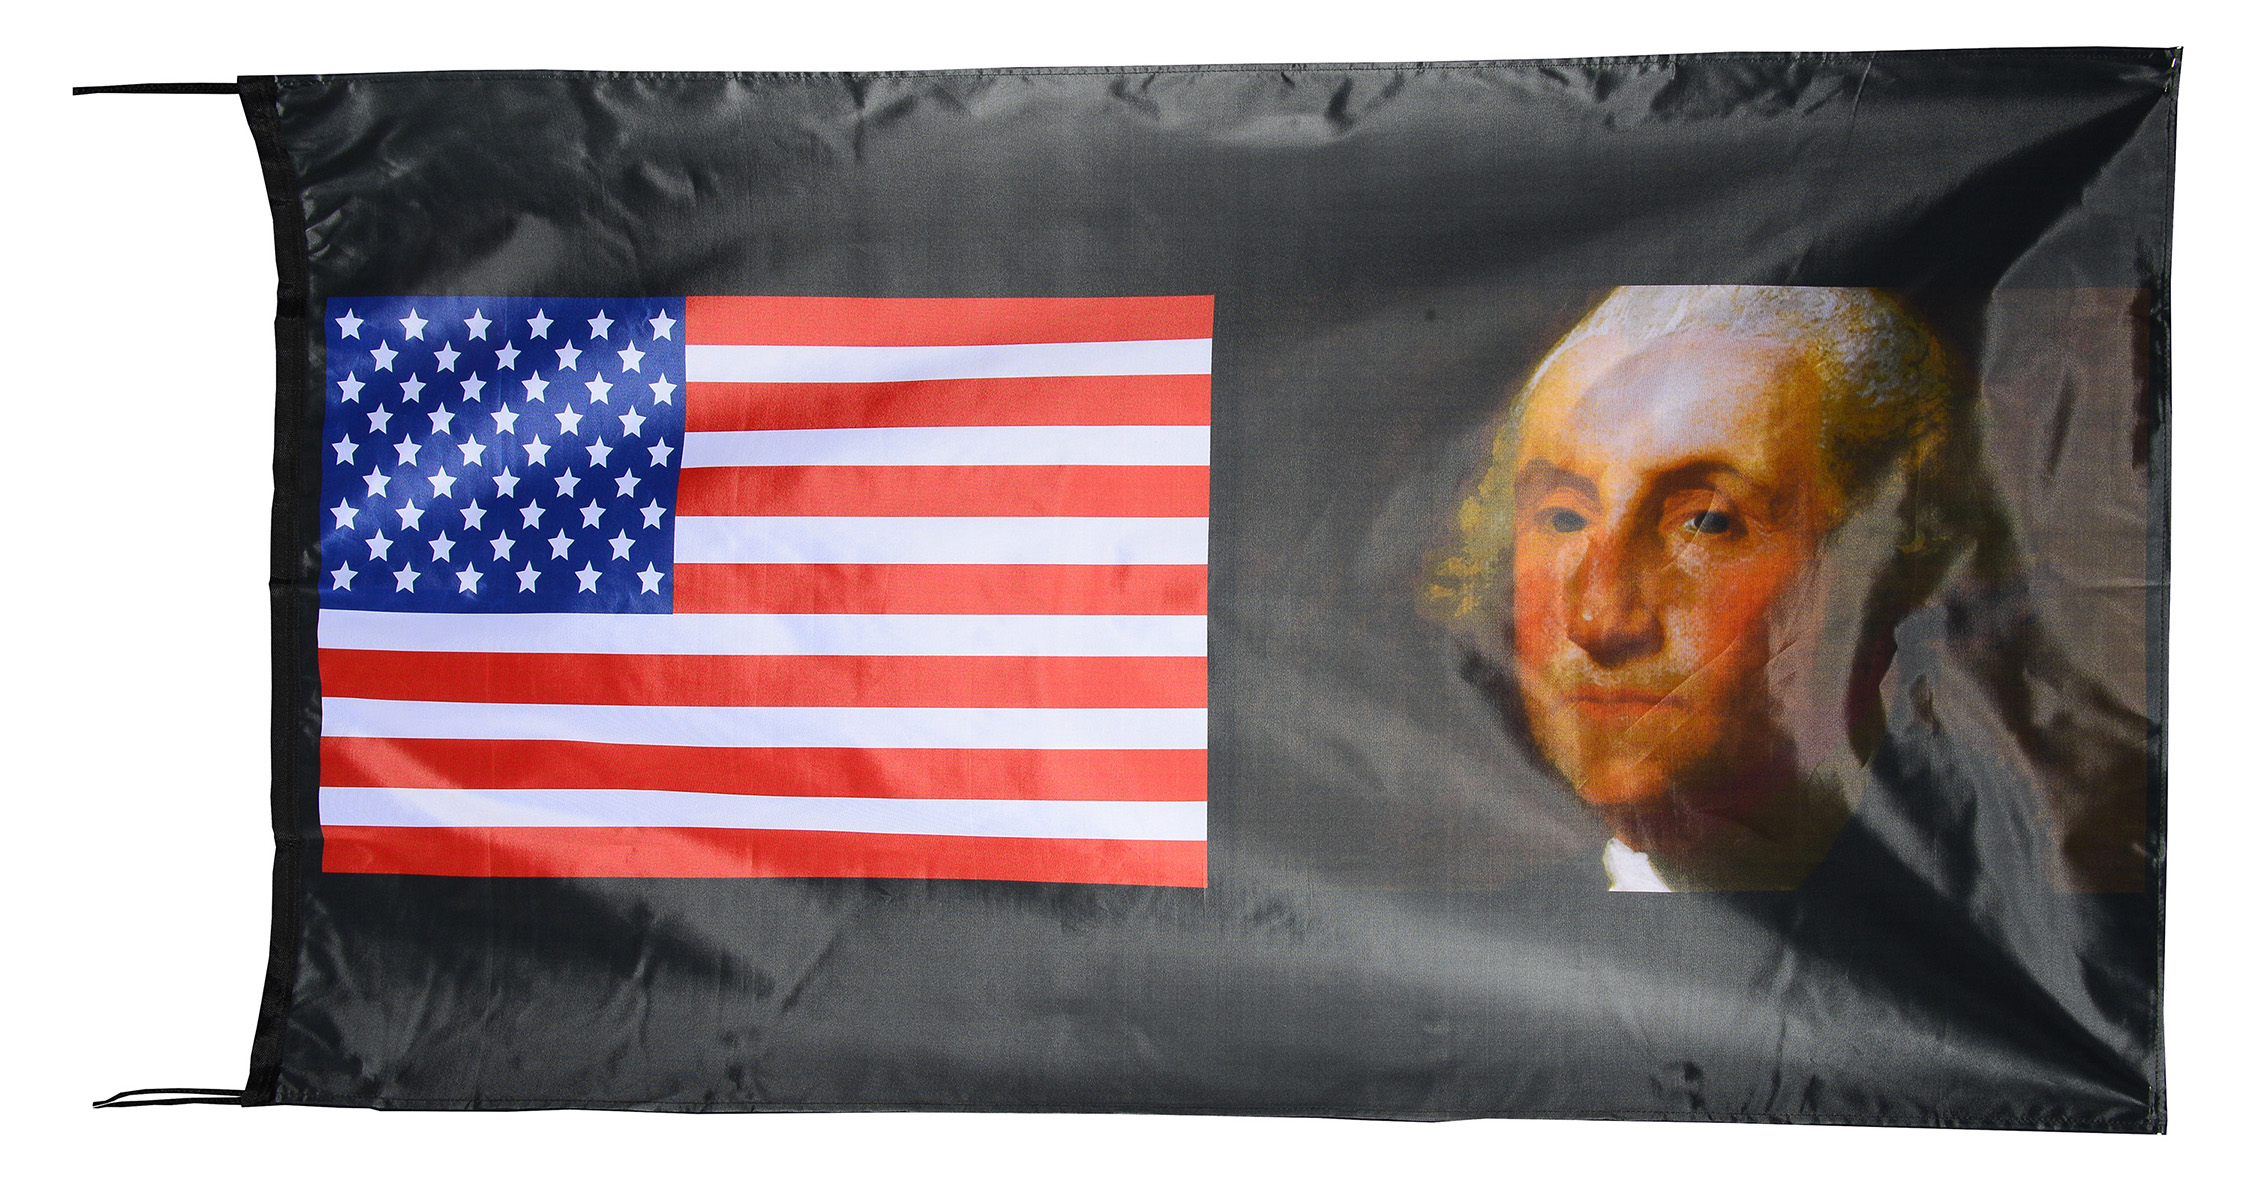 Flag  007 USA / US Country / United States Of America and President George Washington / American Patriotic / Pride Hybrid Weather-Resistant Polyester Outdoor Flag Landscape Banner / Vivid Colors / 3 X 5 FT (150 x 90cm) International Flags for Sale